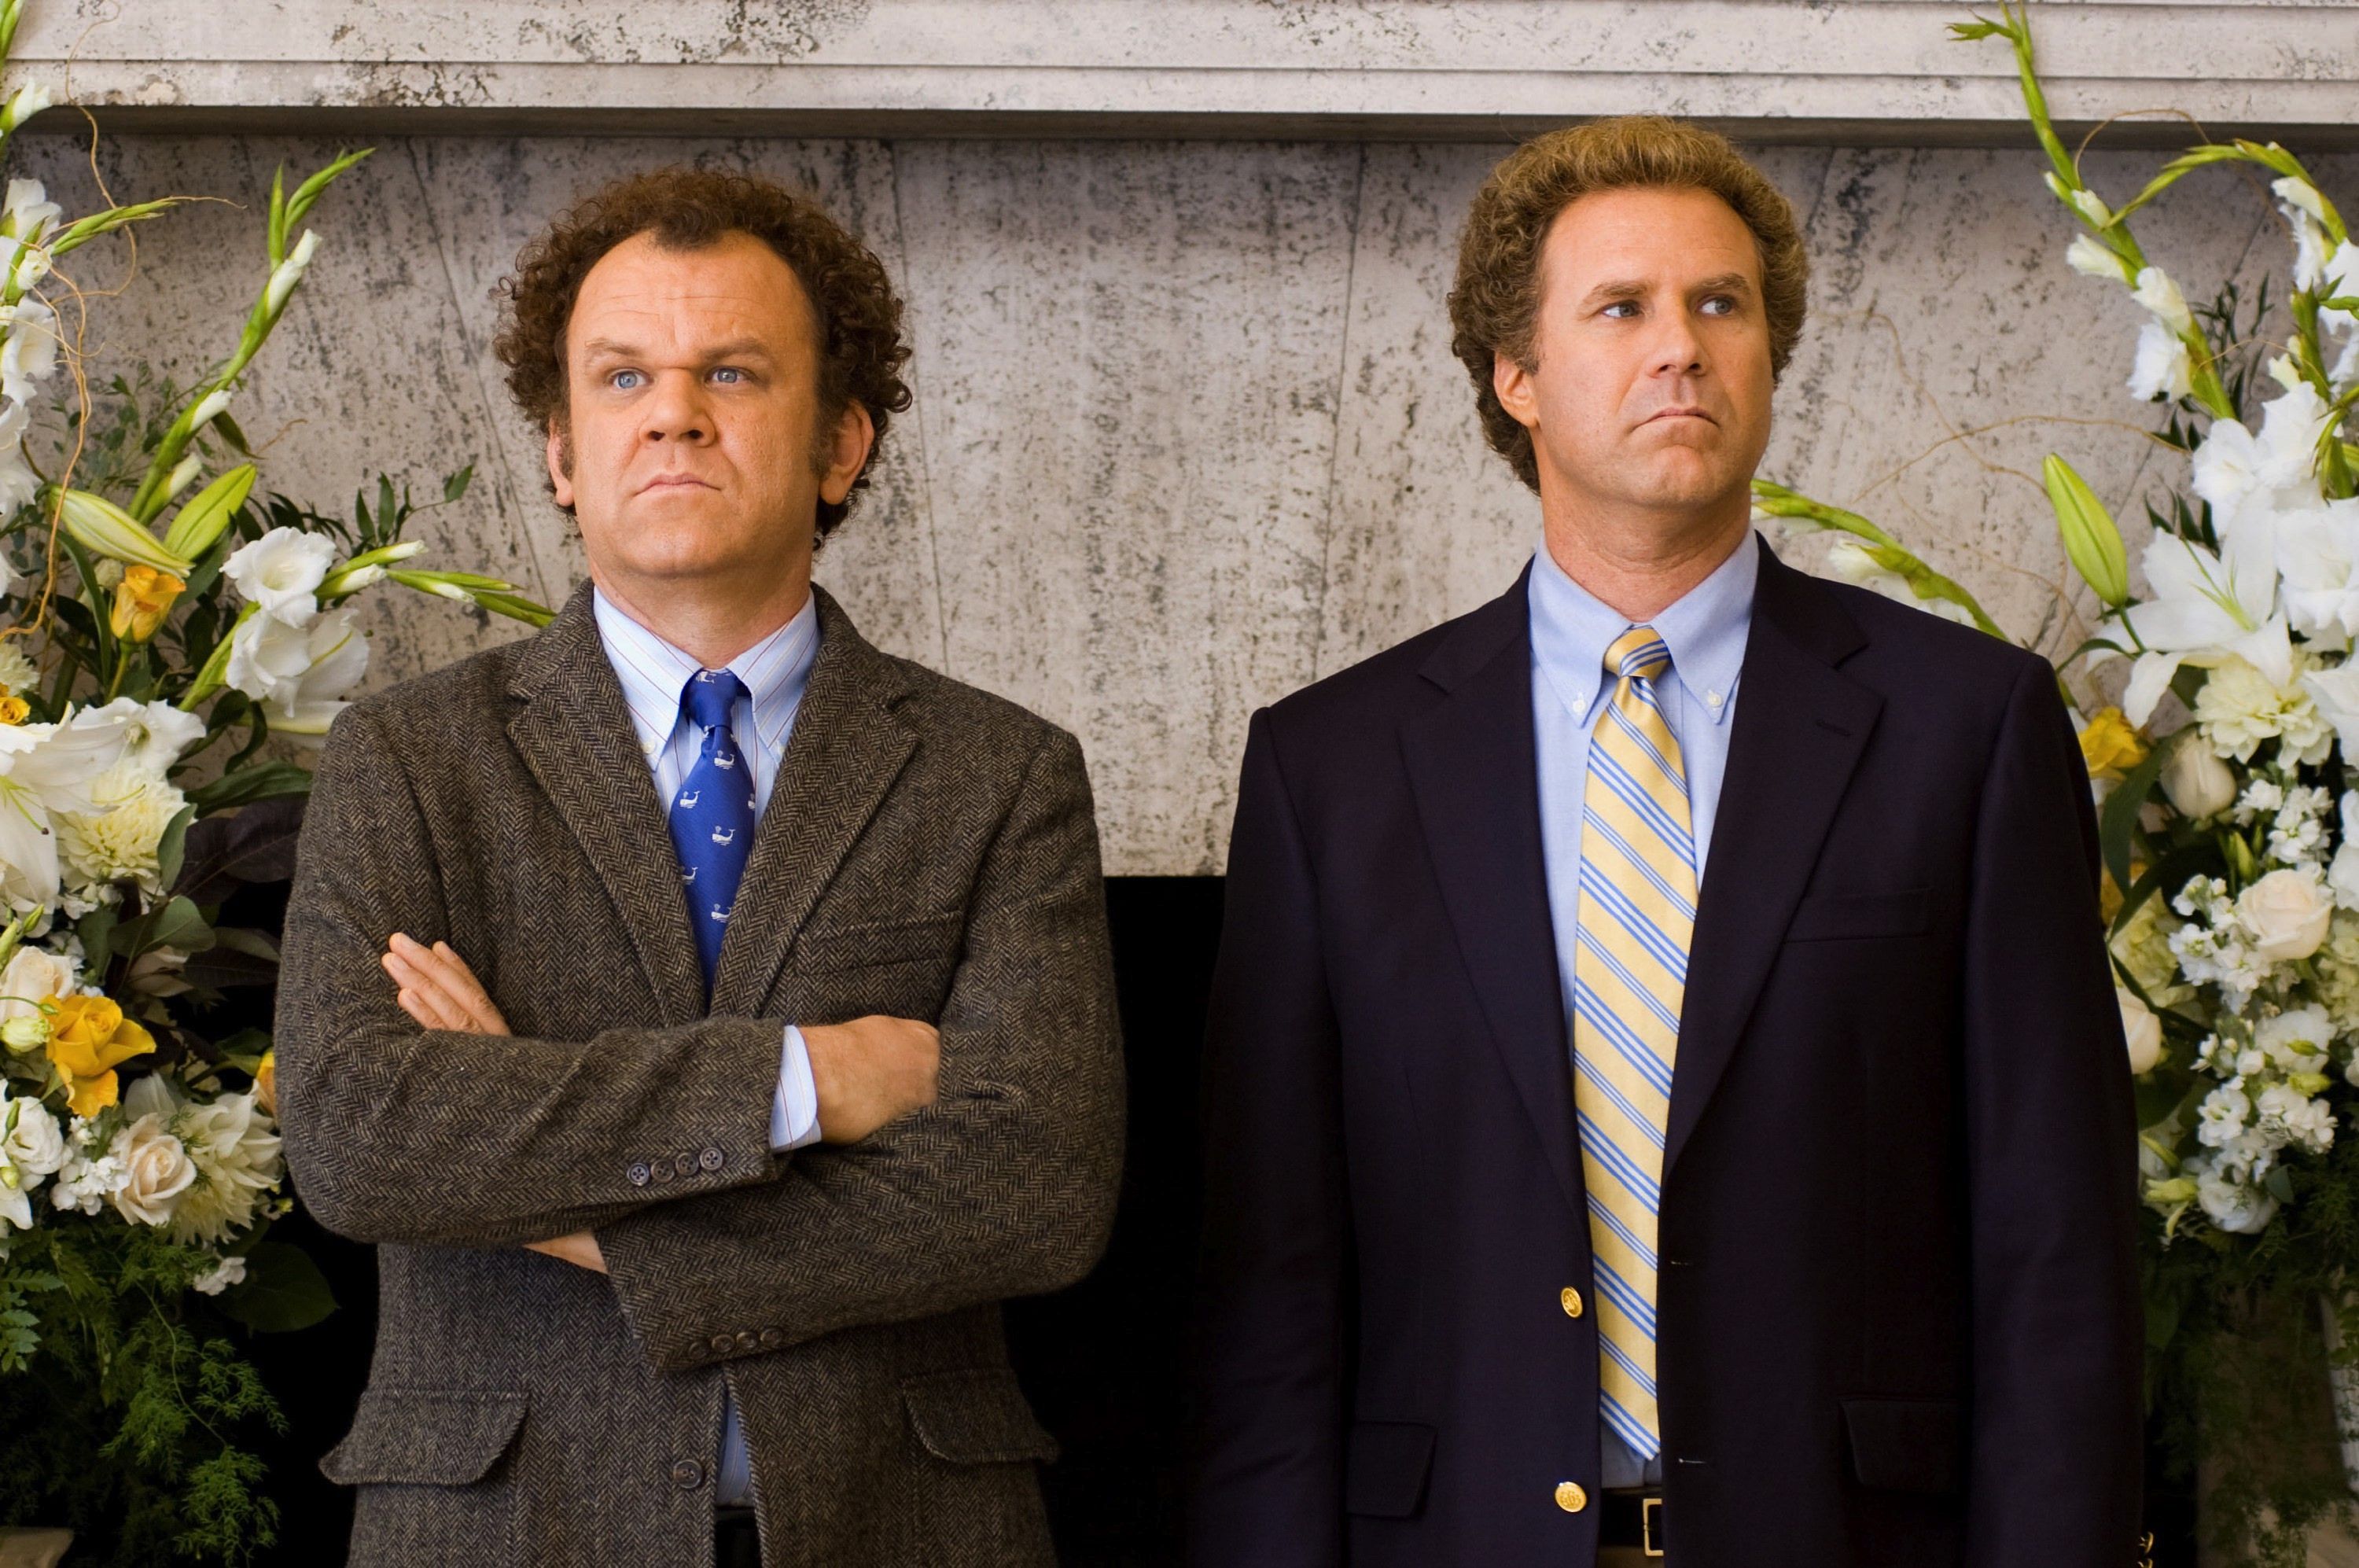 Step Brothers Cut a Seaworld Scene That Made Will Ferrell Cry With